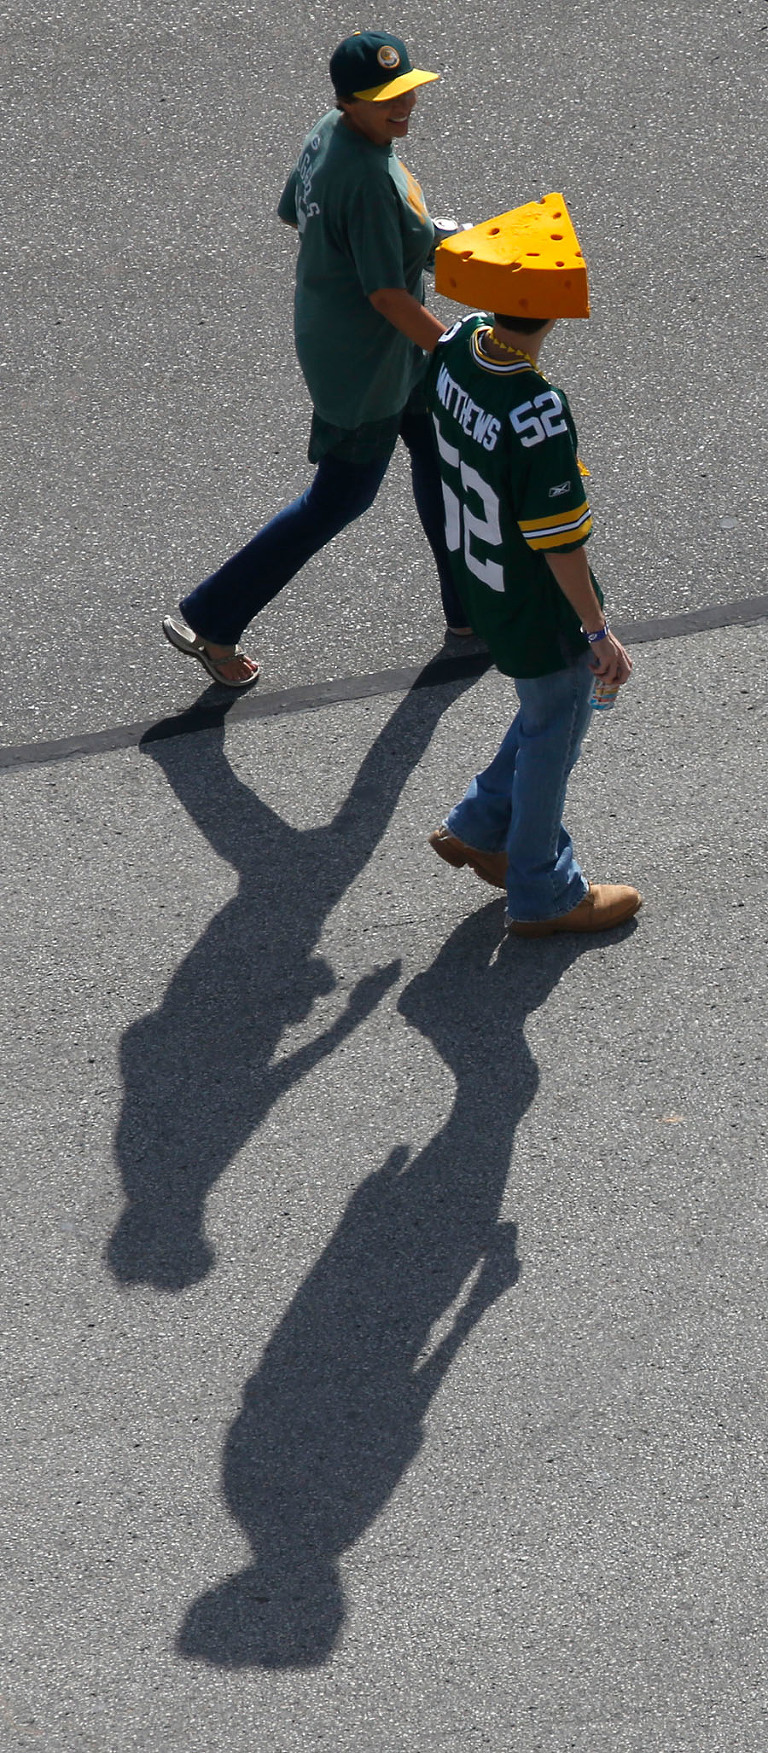 Green Bay Packers fans walk around the stadium before the game.